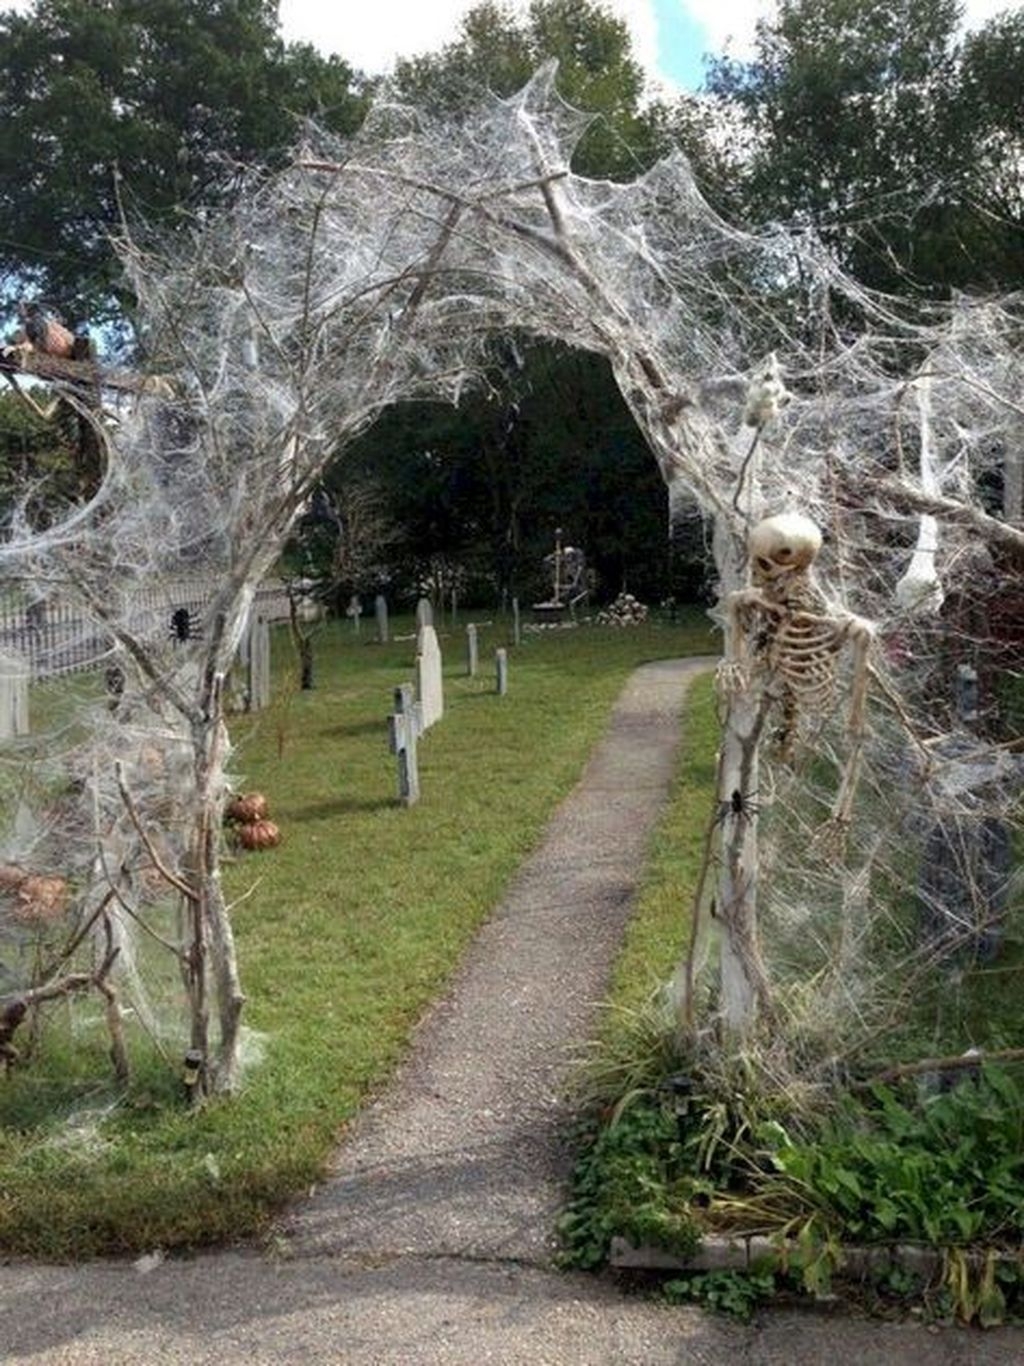 30+ Newest Diy Outdoor Halloween Decor Ideas That Very Scary - Newest Diy OutDoor Halloween Decor IDeas That Very Scary 01